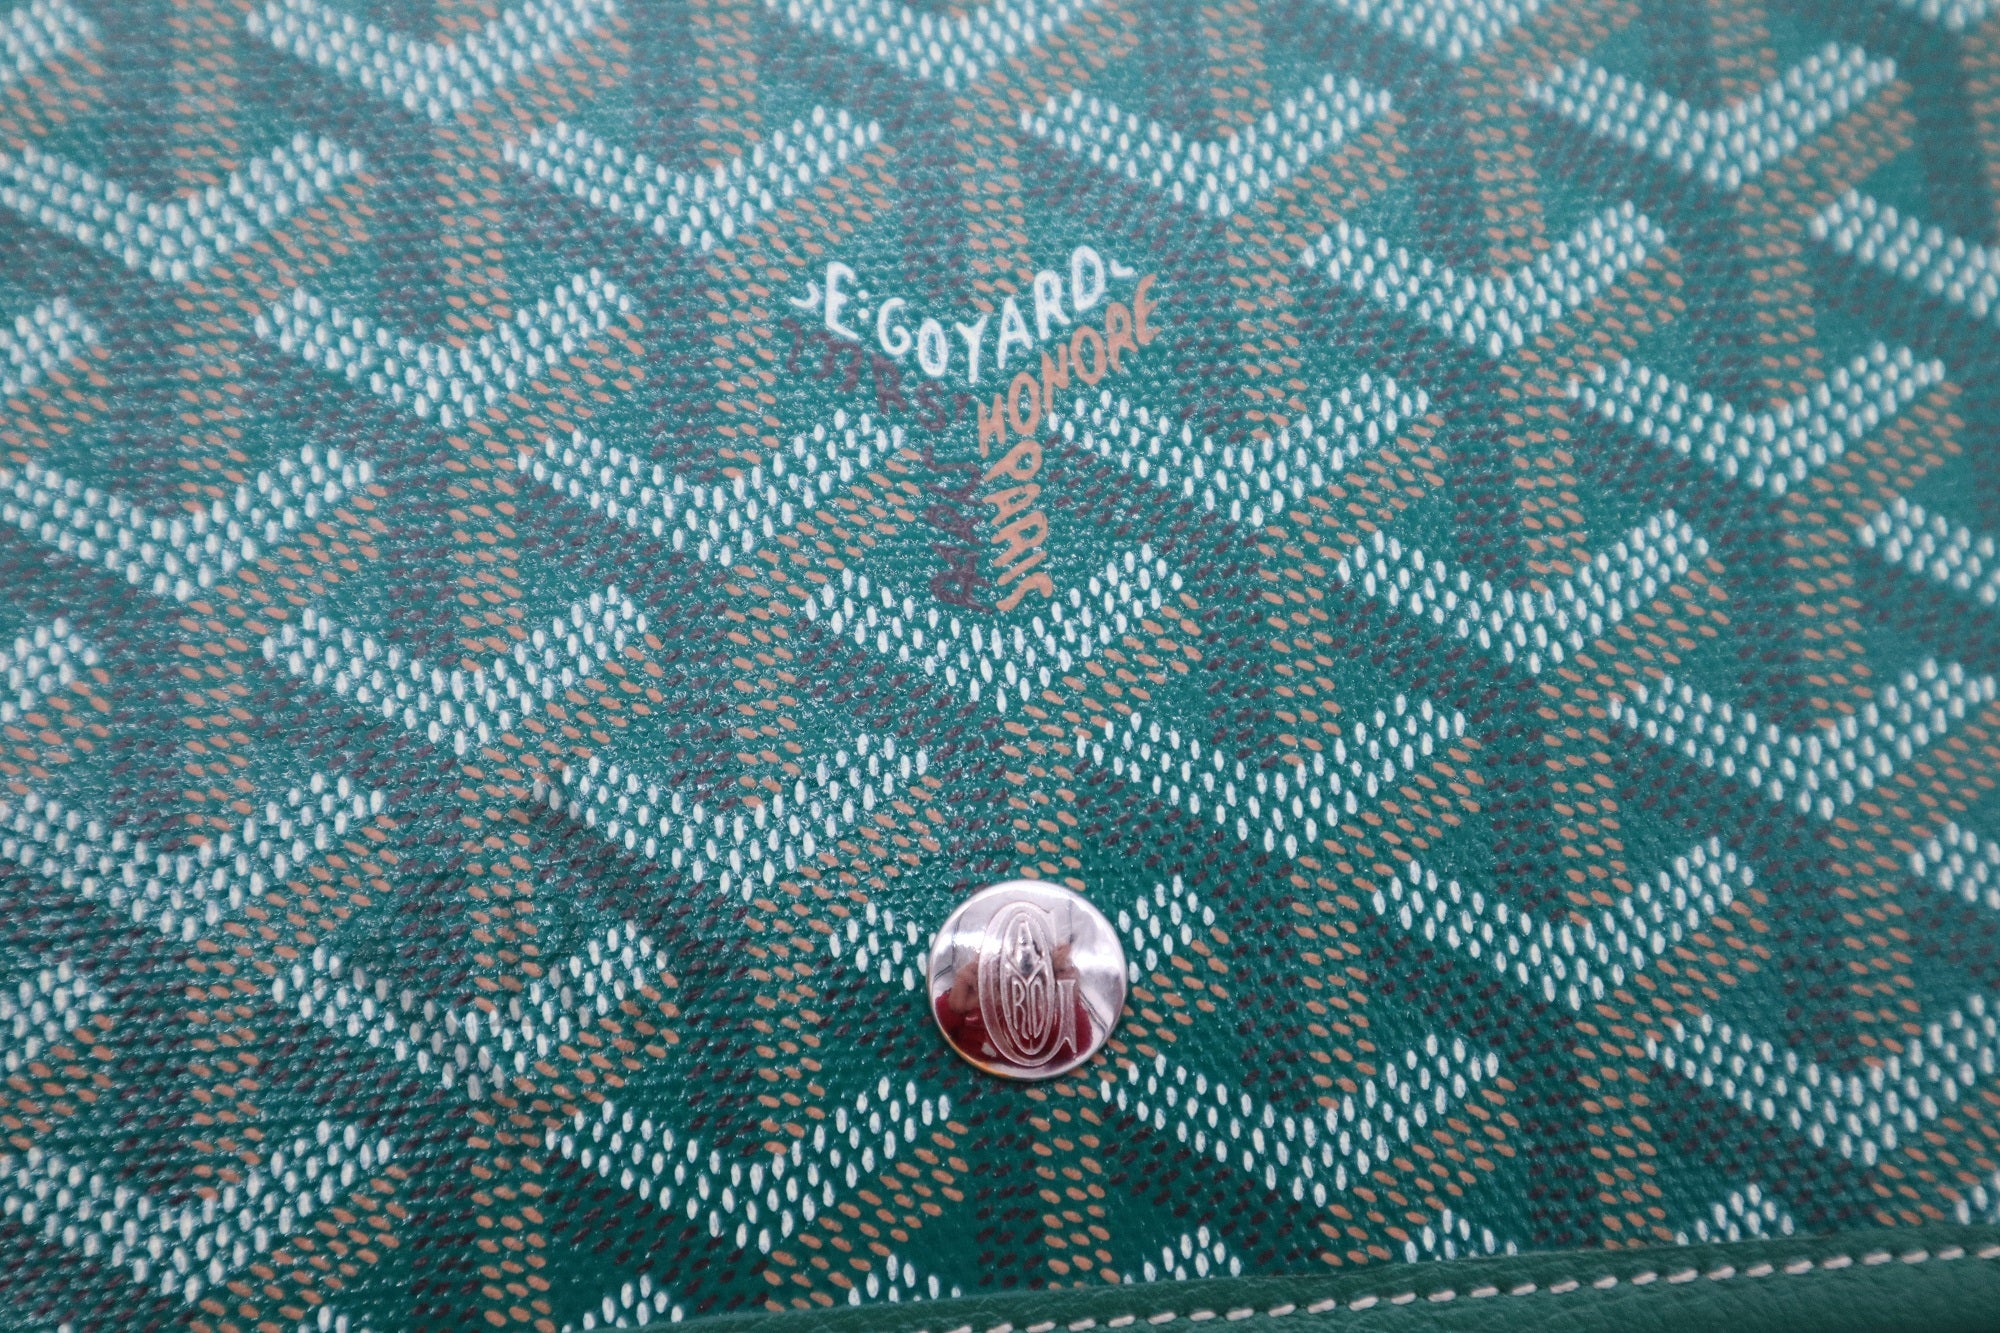 Maison Goyard - *The Plumet Wallet & Bag: The Art of Modularity by Goyard  Inspired by the removable inner pochette of the emblematic Saint-Louis tote  bag, the Plumet celebrates Goyard's traditional artisan